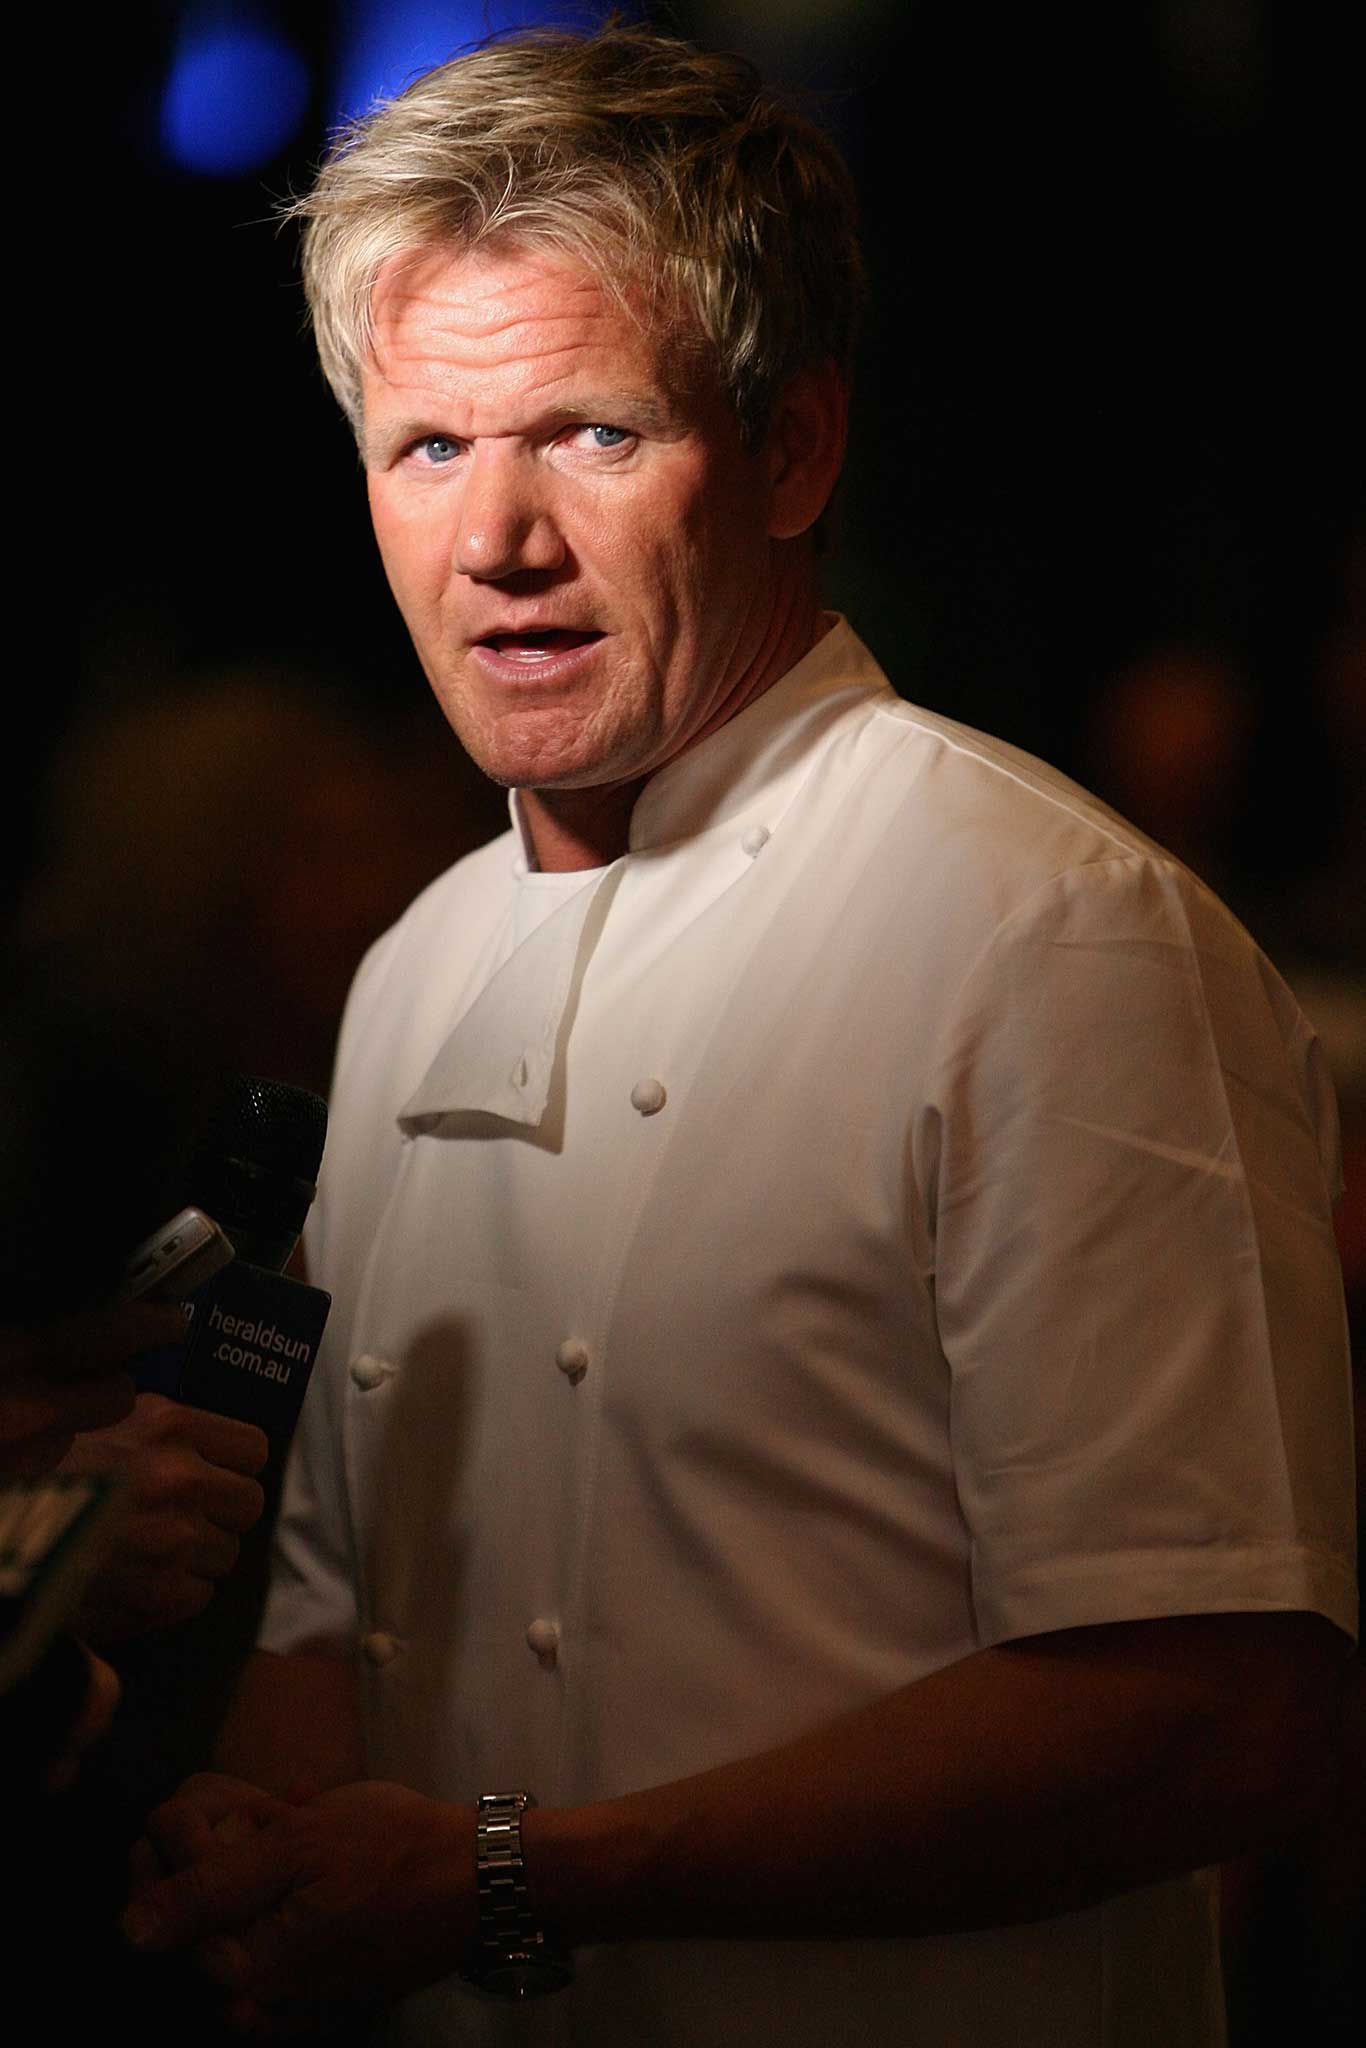 Hell's kitchen? Gordon Ramsay is not just playing up for the cameras